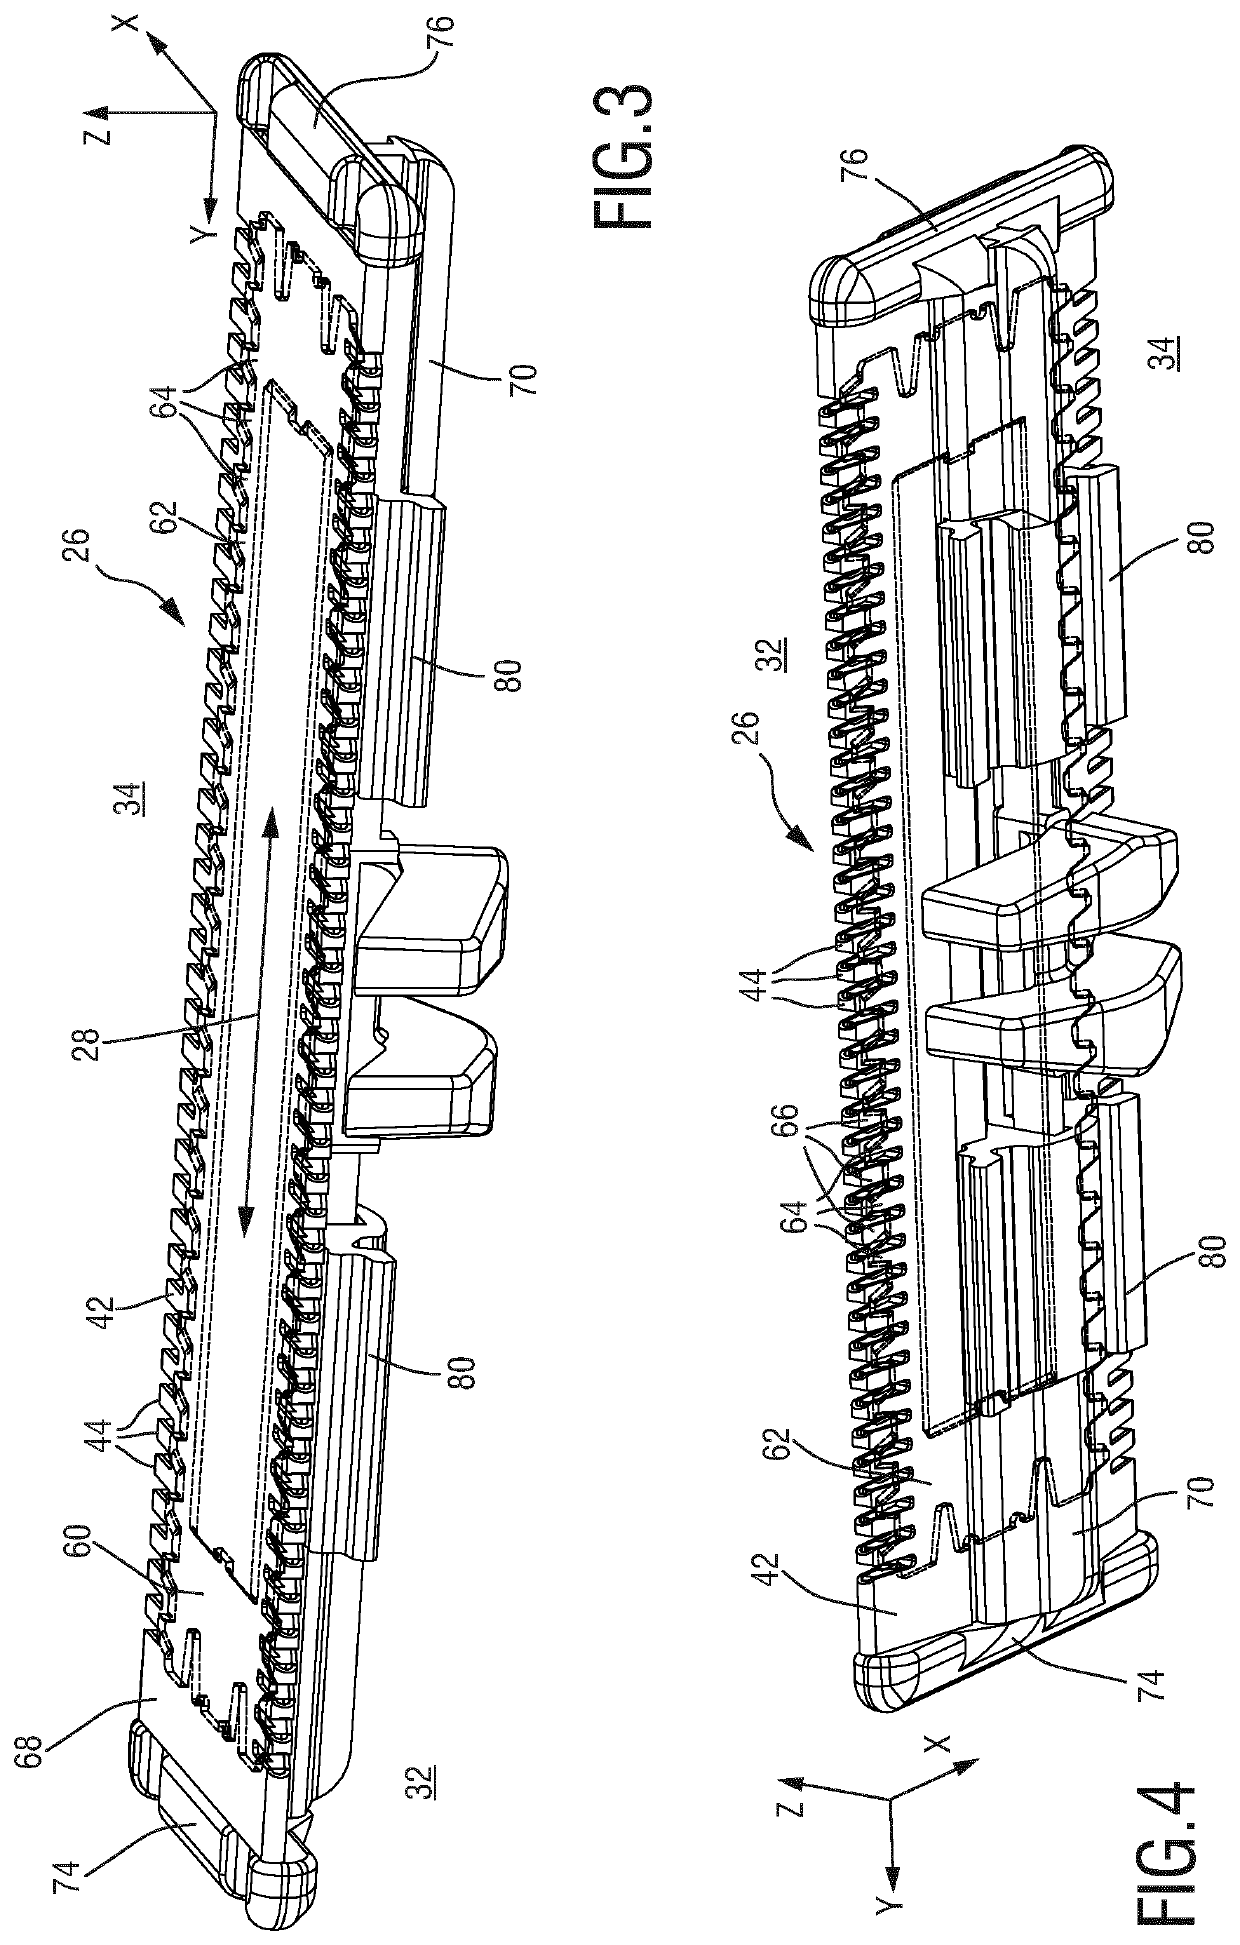 Stationary blade, blade set, and manufacturing method